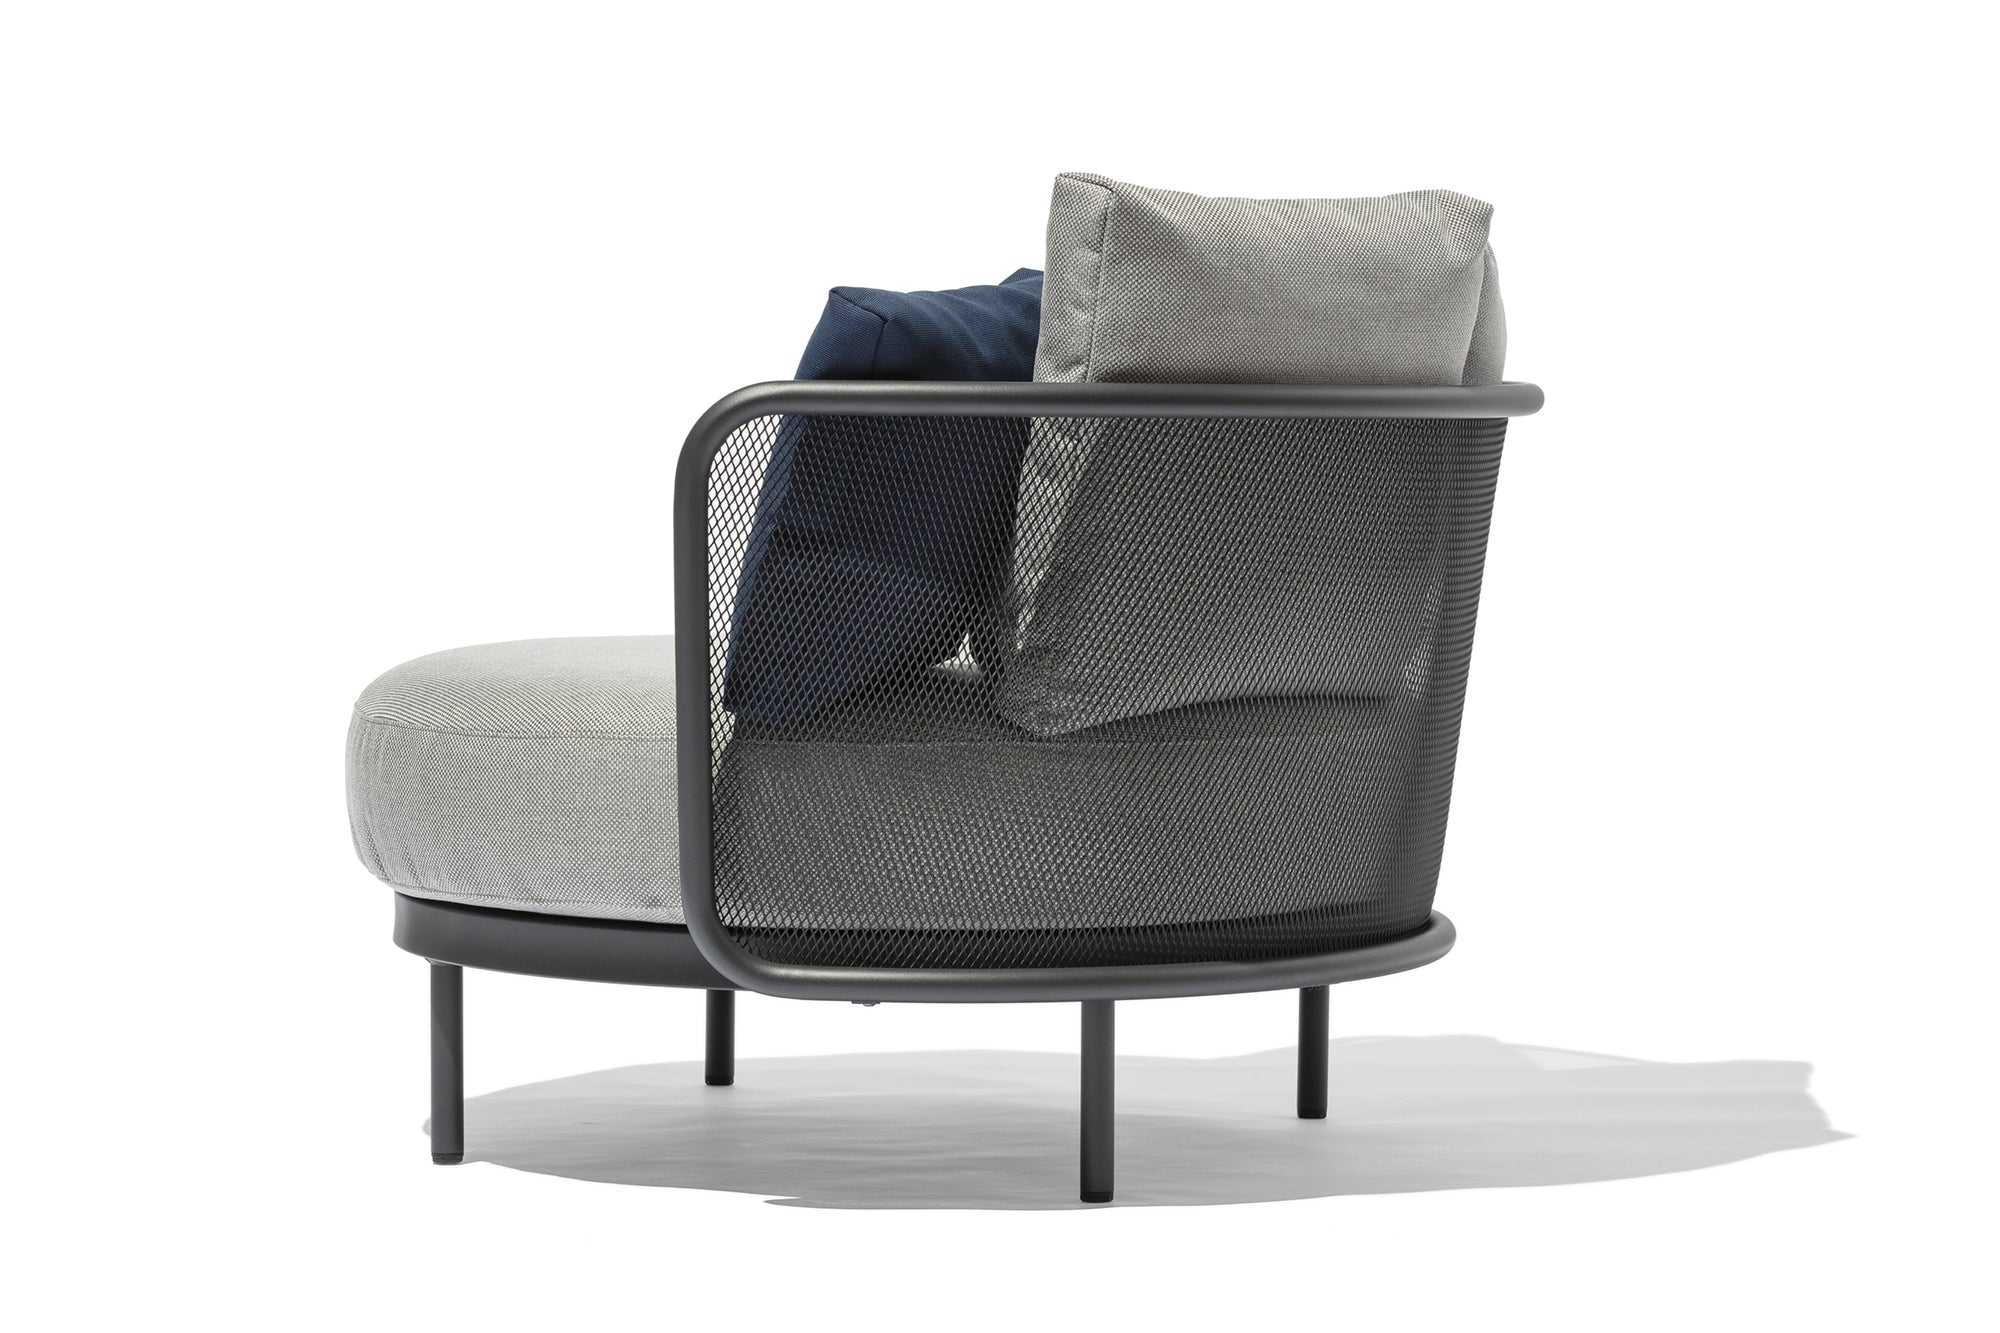 Todus Baza round lounge chair